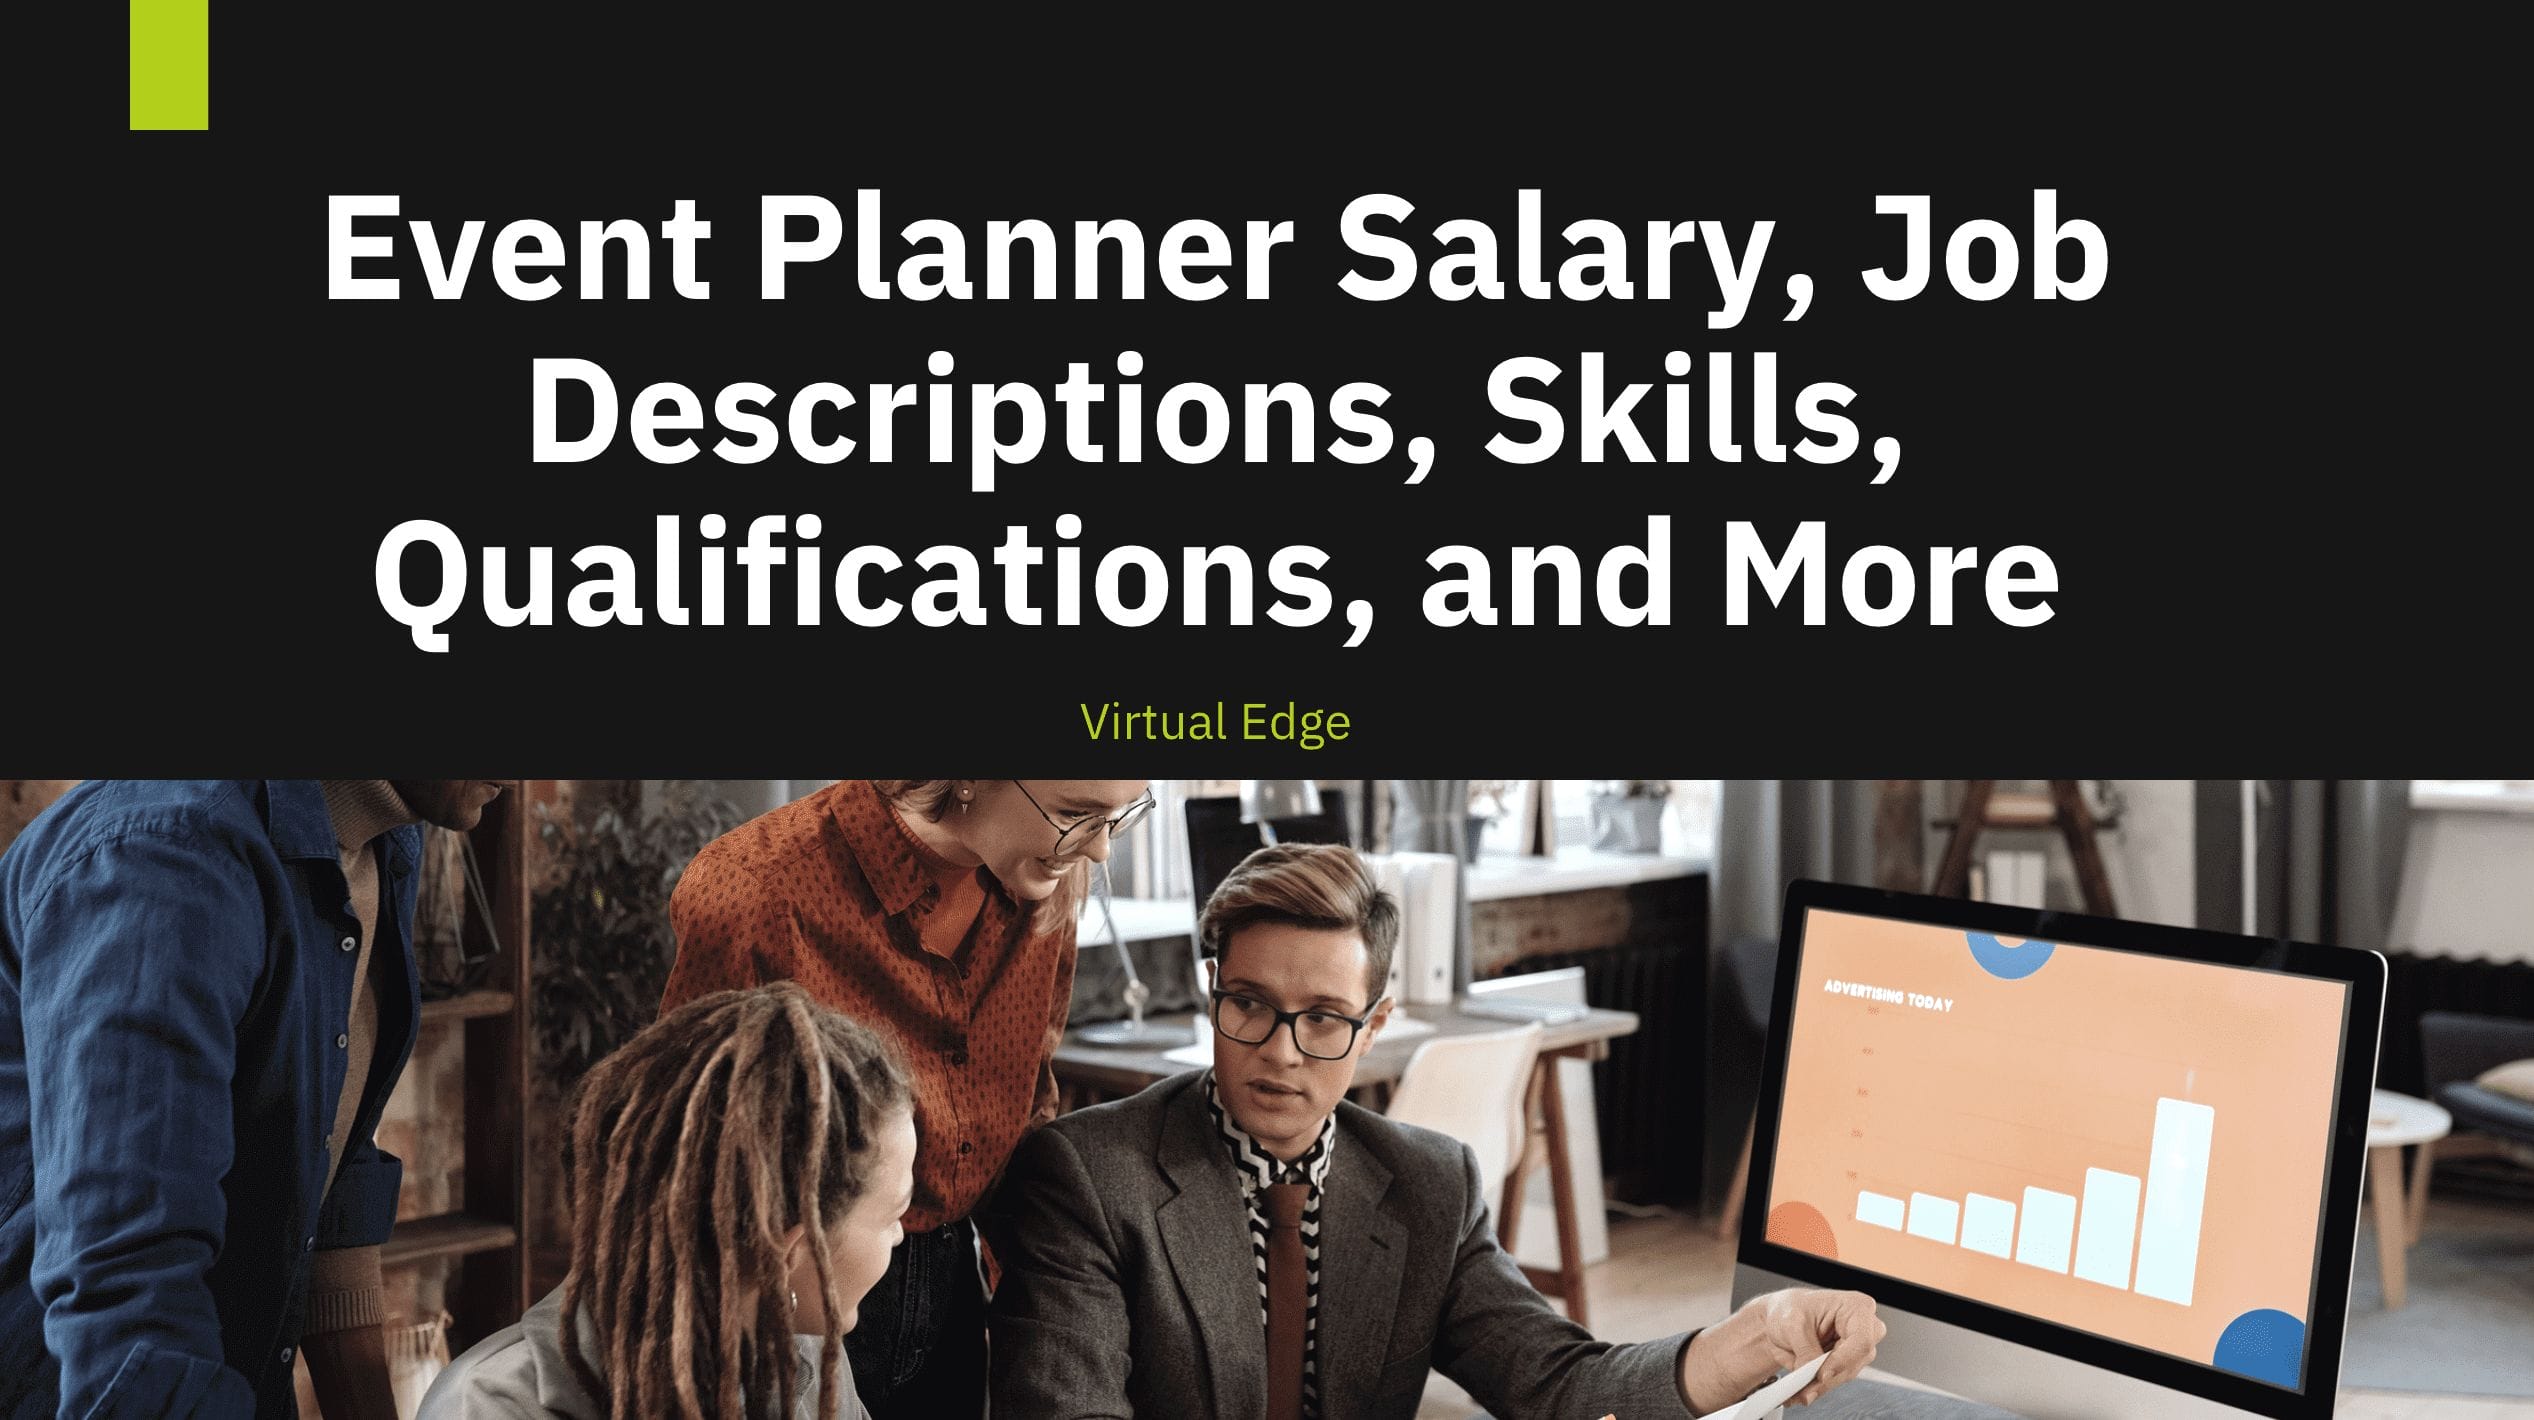 Event Planner Salary, Job Descriptions, Skills, Qualifications, and More